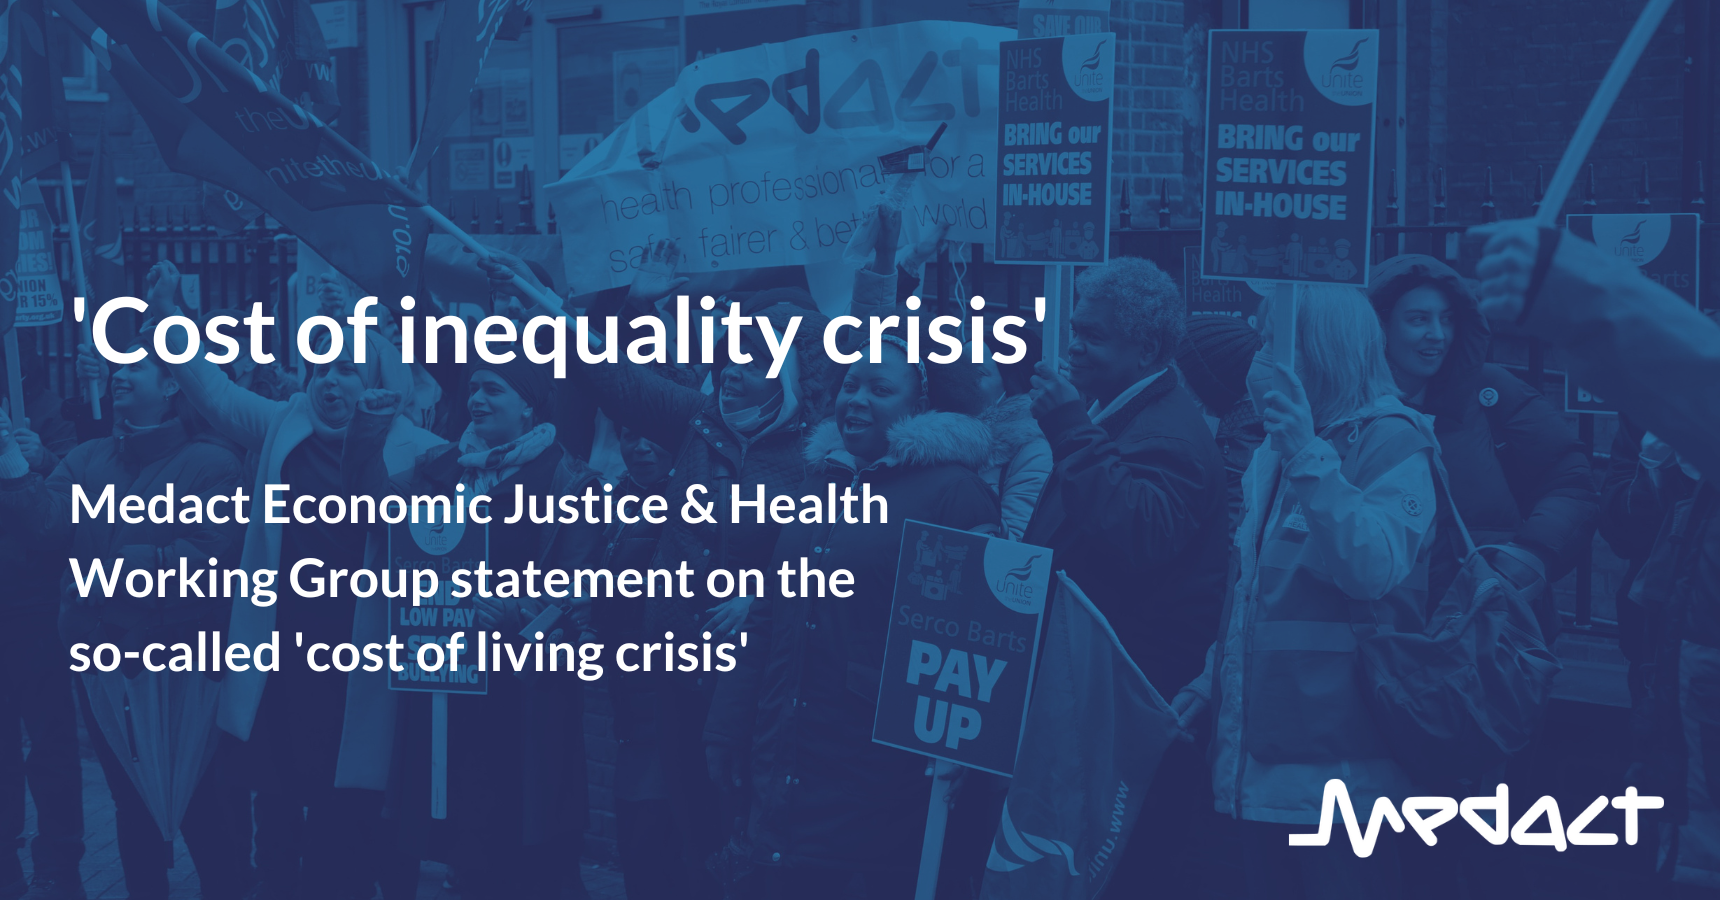 Cost of inequality crisis: Statement on the so-called ‘cost of living crisis’